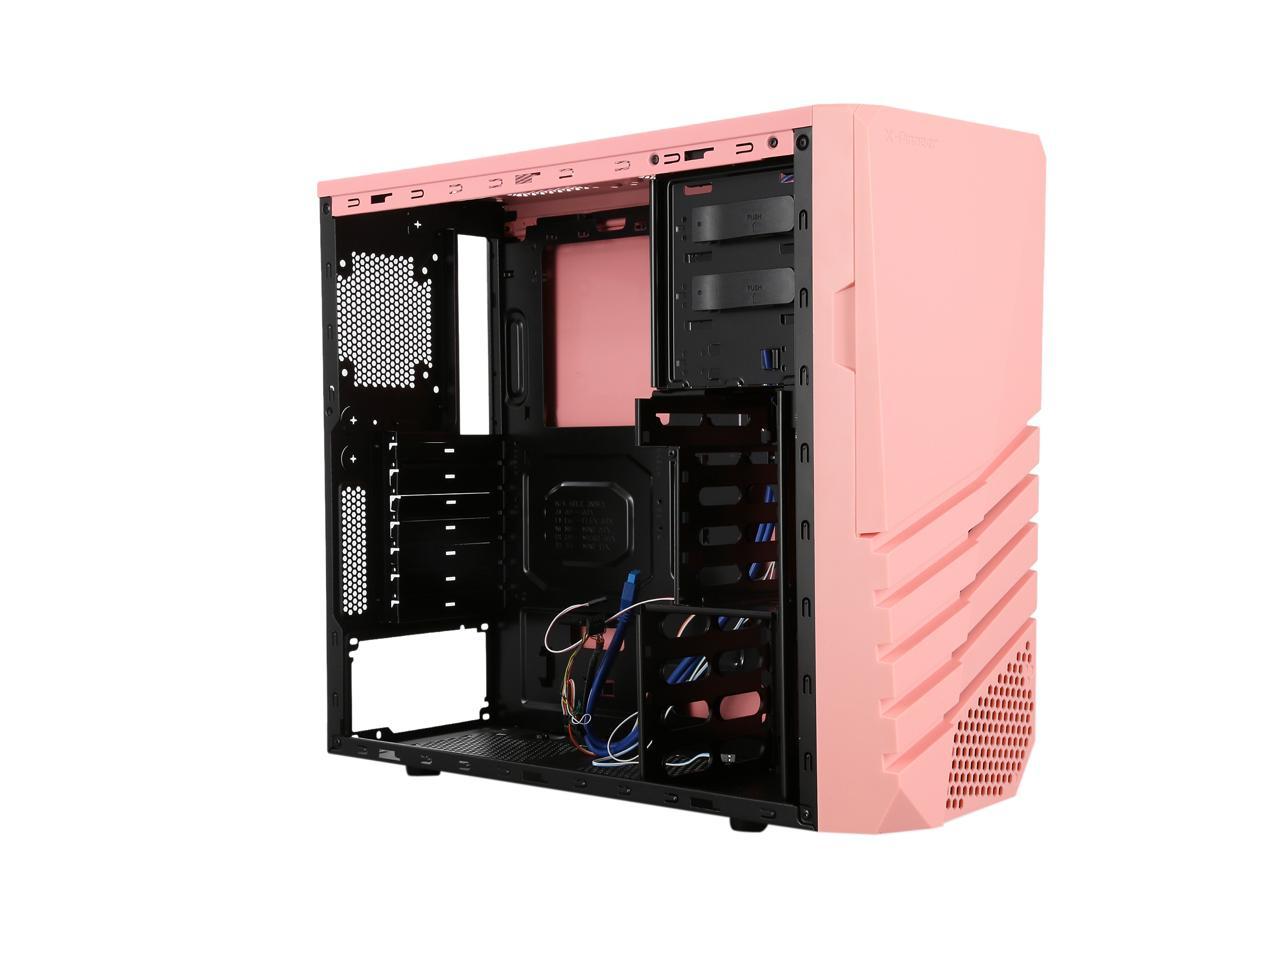 Can Install up to 6 Fans 1 x 120mm Red LED Fan Top 2 x USB3.0 2 x HD Audio Ports Fits Video Card up to 13 Apevia X-PIONEER-RD ATX Mid Tower Gaming Case w/ Large Red Tinted Side Window Red 